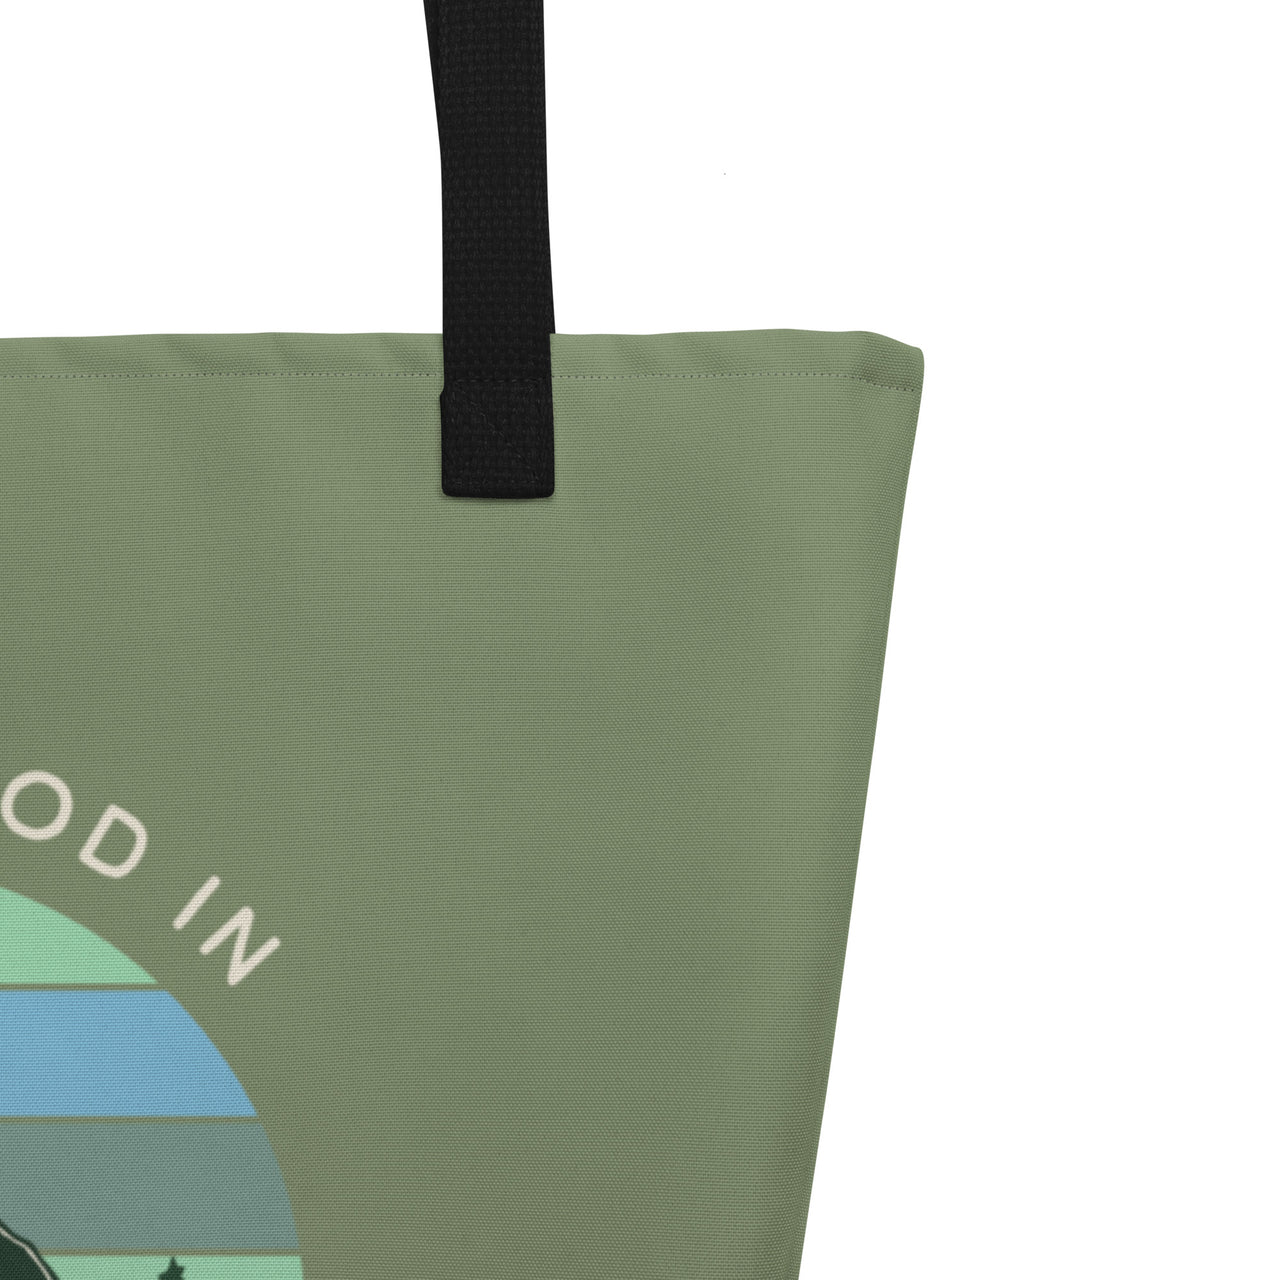 Life is Good in Oregon - Large 16x20 Tote Bag W/Pocket